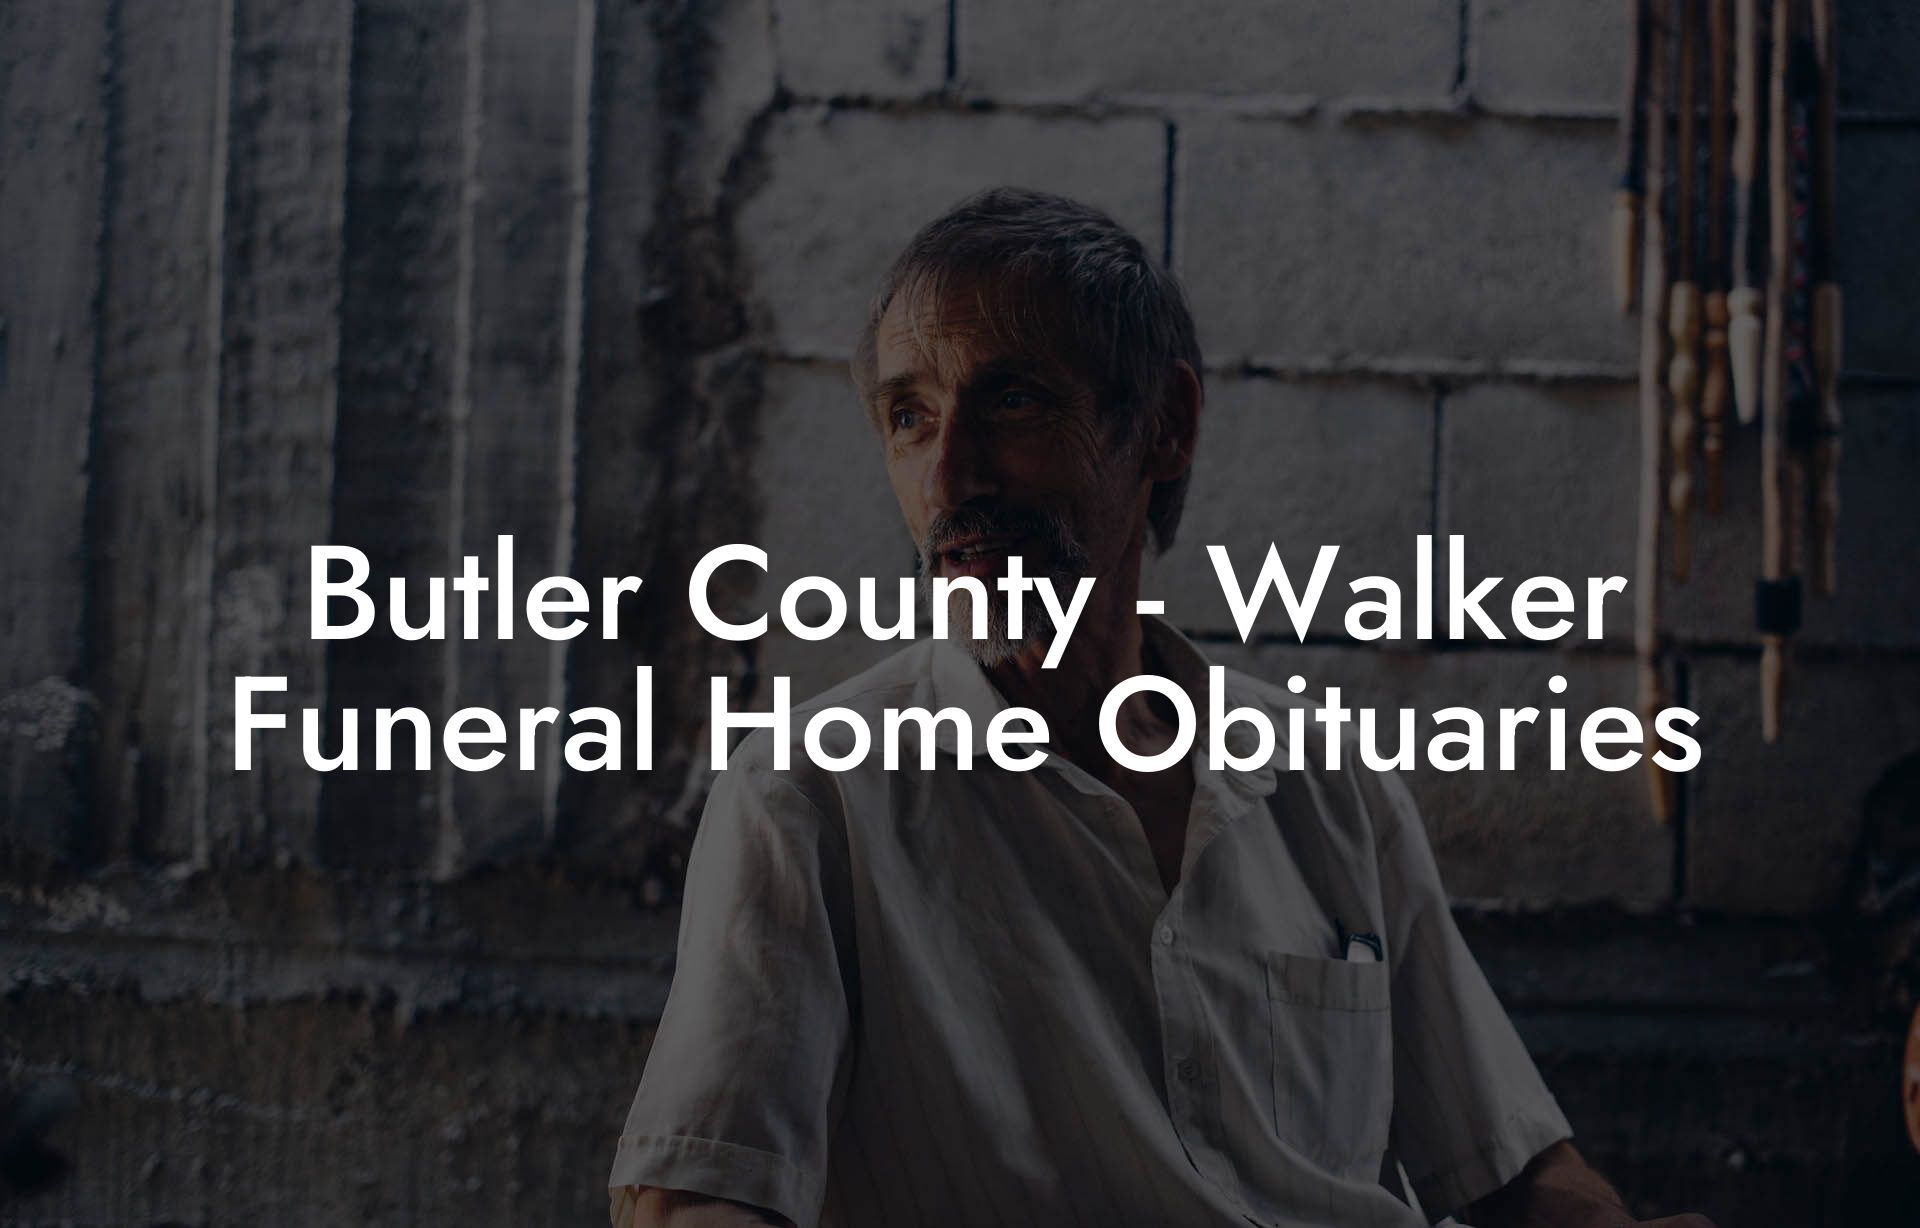 Butler County - Walker Funeral Home Obituaries